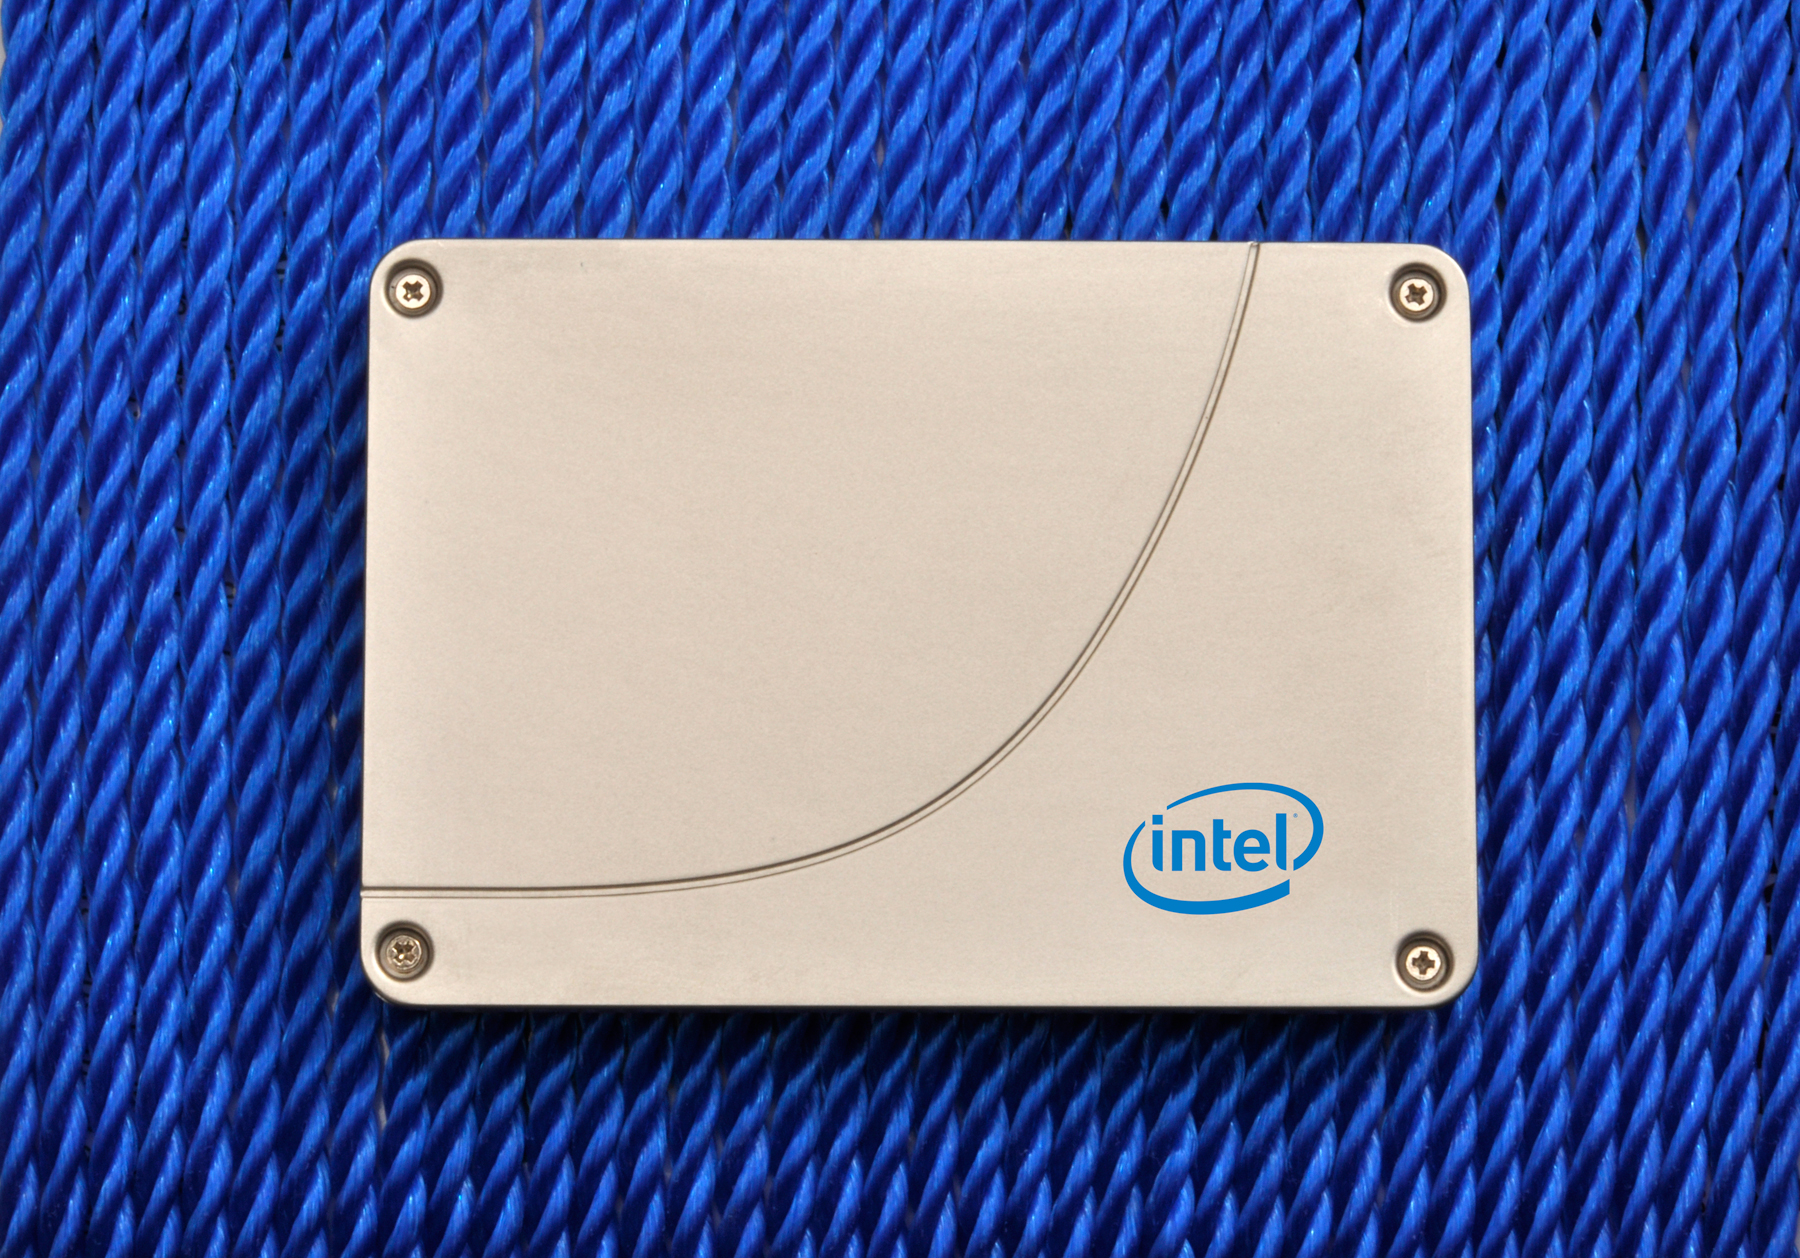 Intel Releases the 520 Series, SandForce Driven SSD